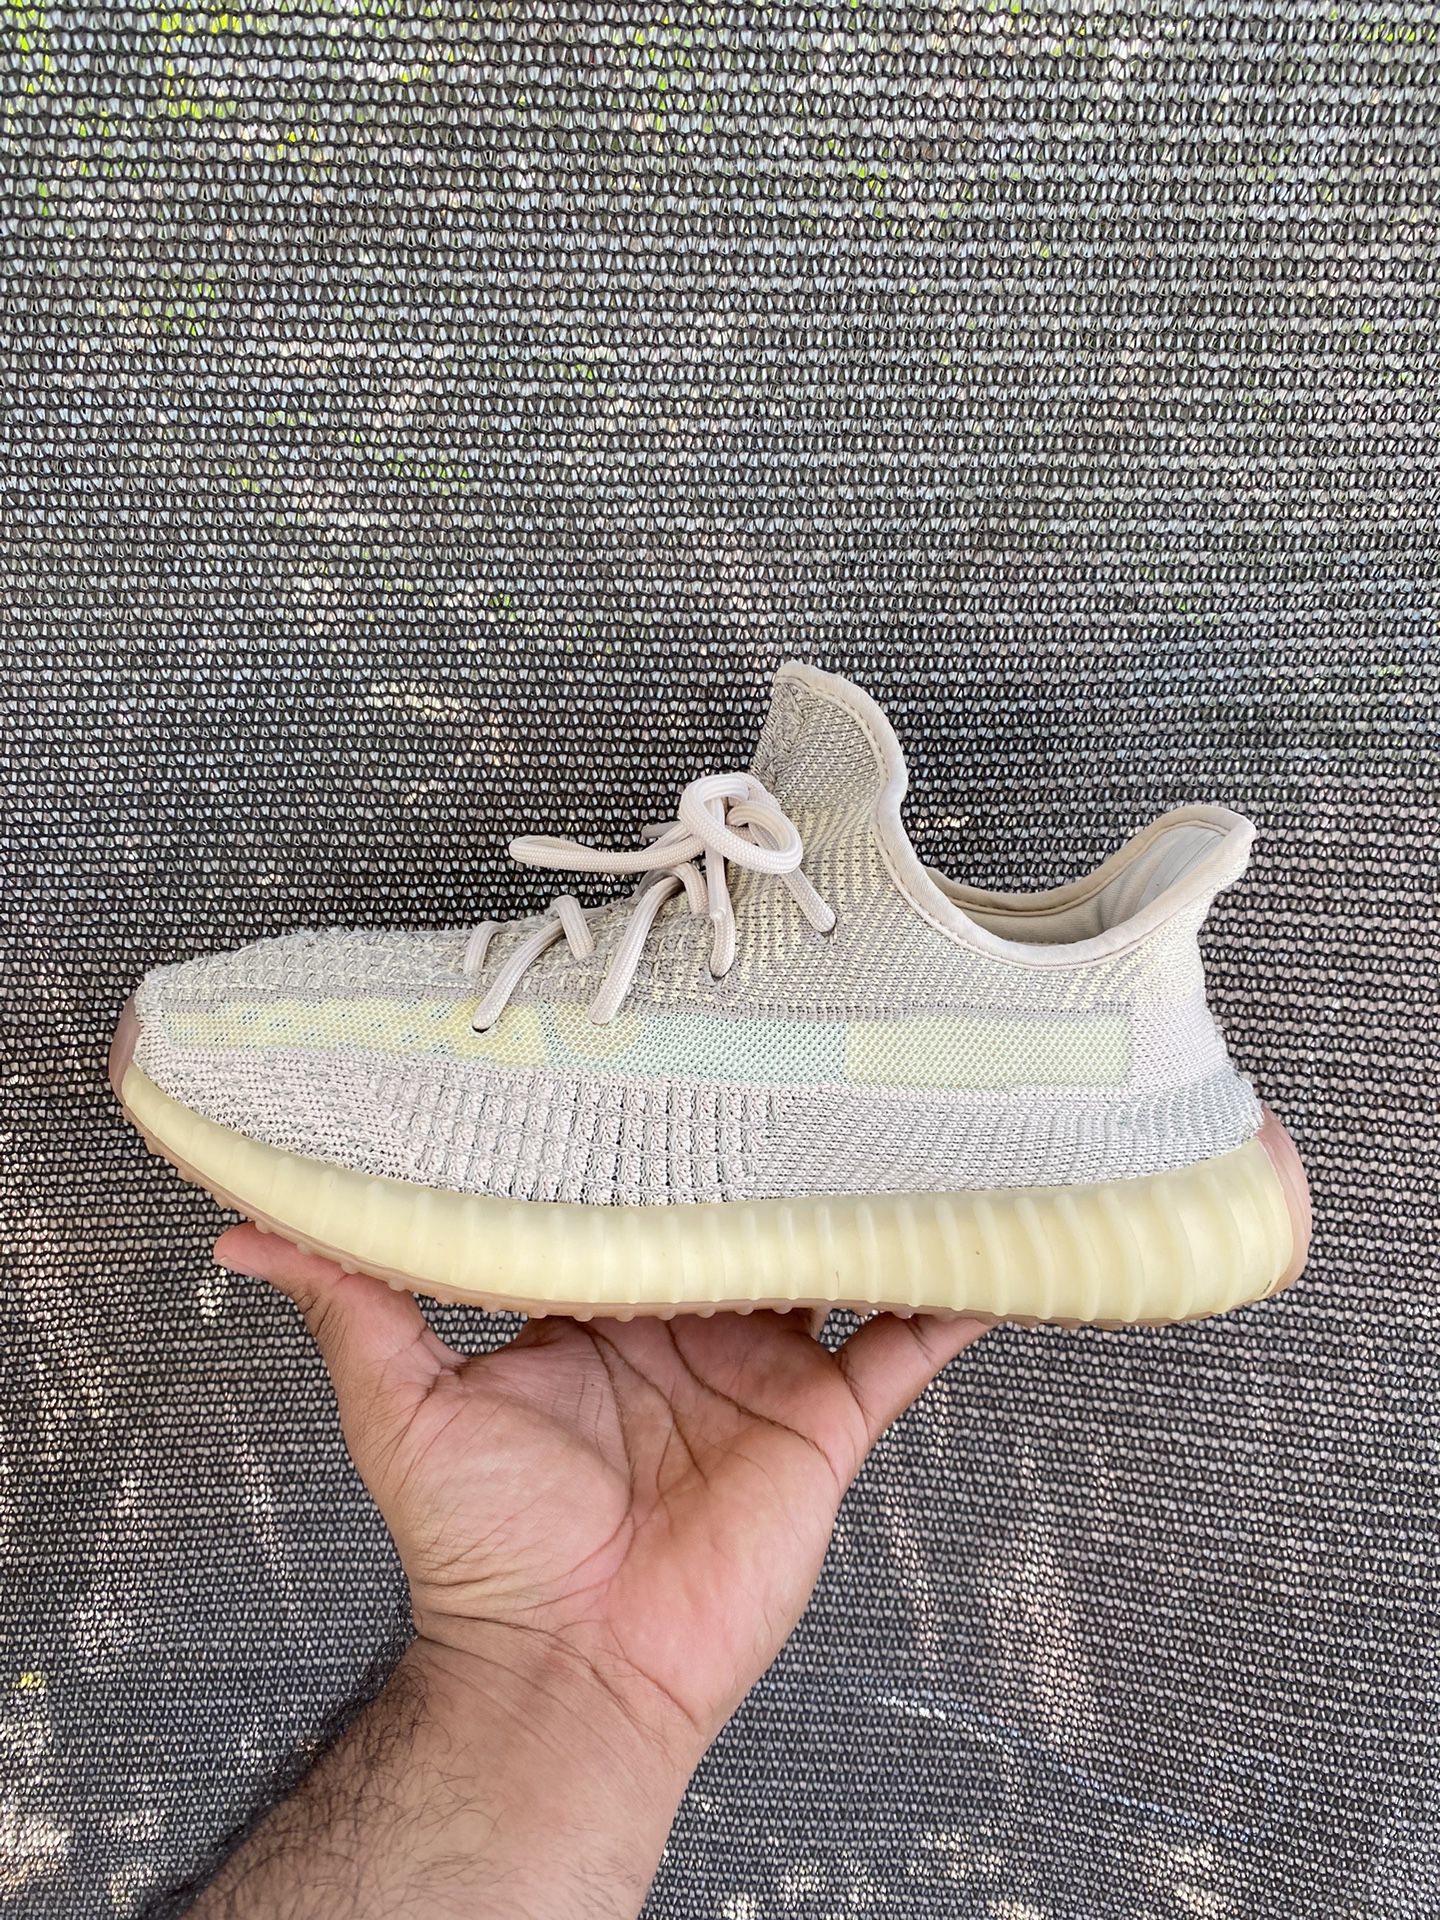 Yeezy X Adidas BOOST 350 V2 CLOTH LOW TRAINERS